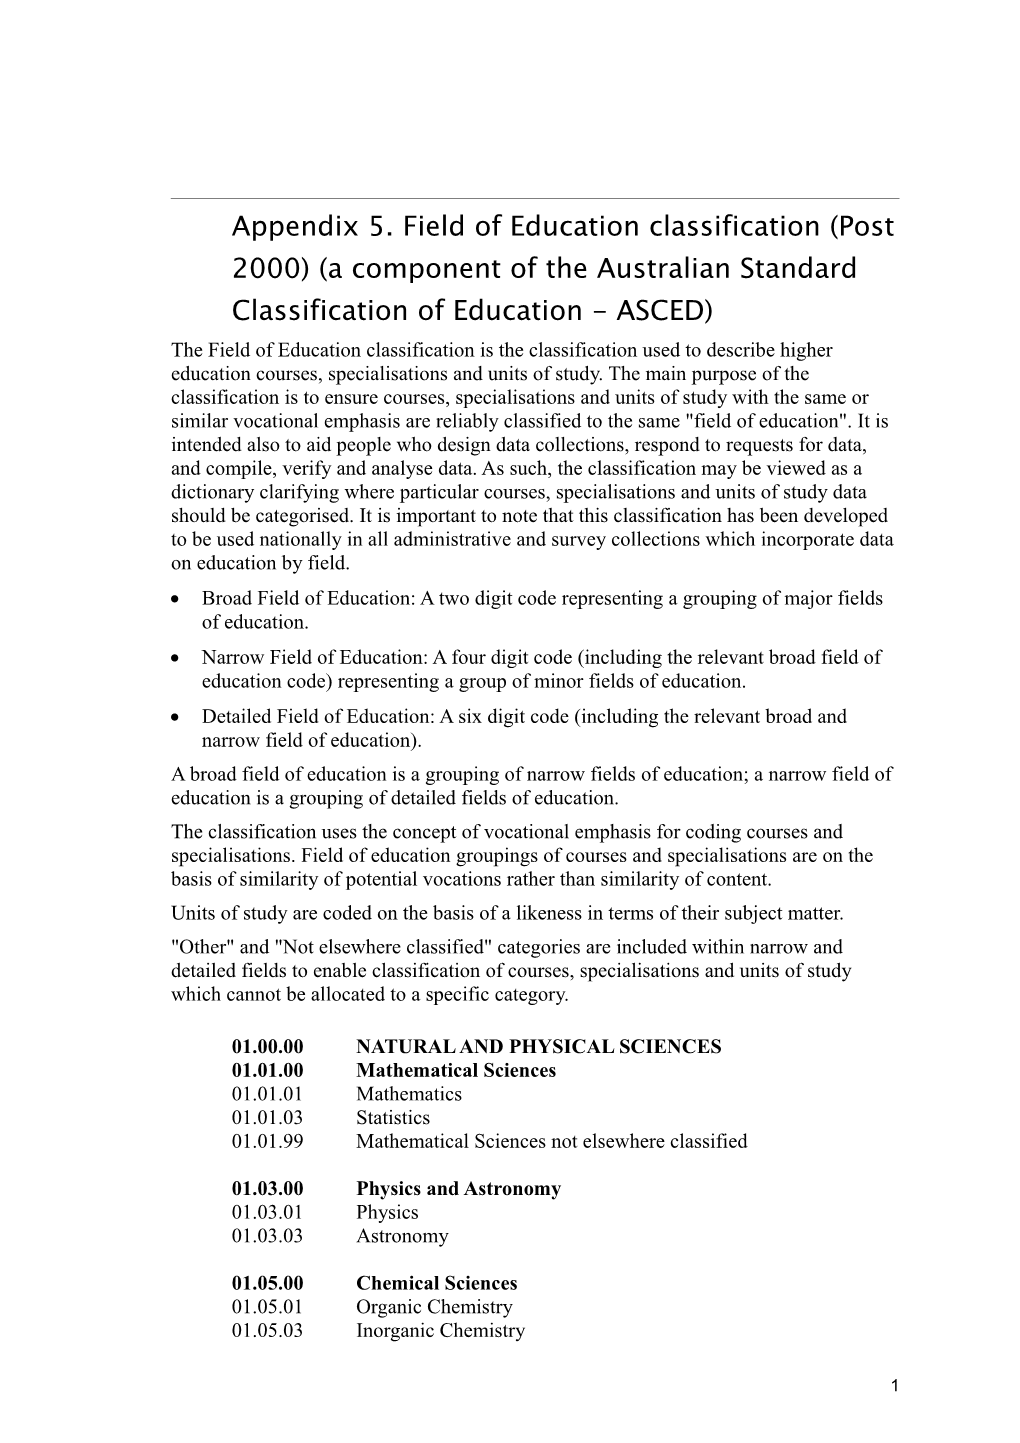 Appendix 5. Field of Education Classification (Post 2000) (A Component of the Australian